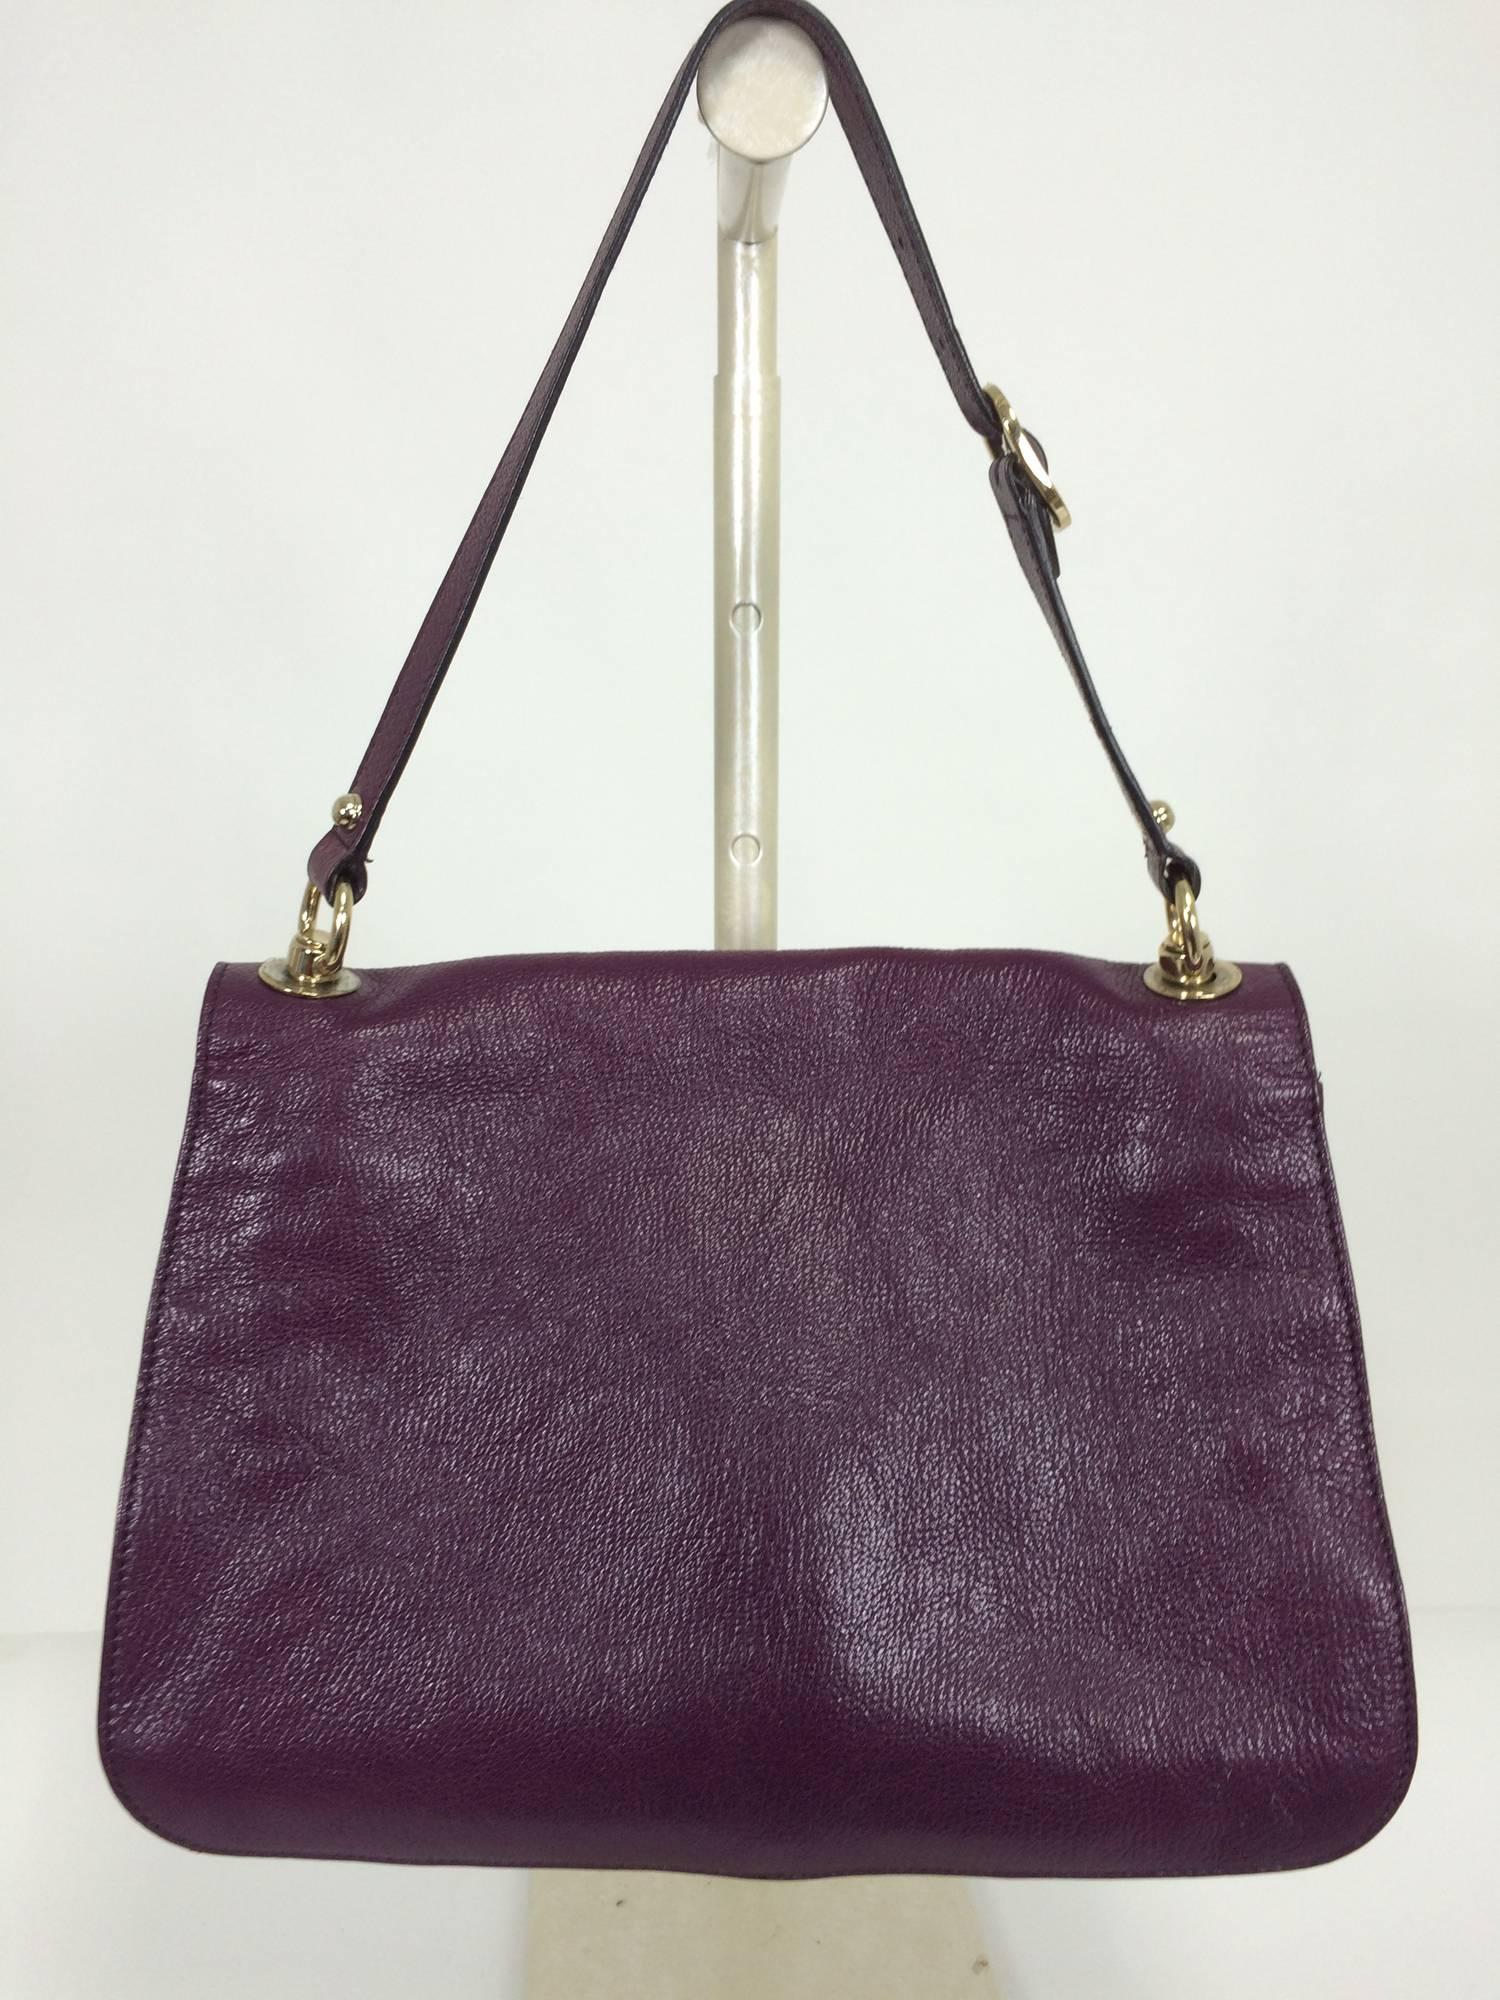 Gucci Blondie rare plum glazed leather shoulder handbag gold hardware...Rare plum colour glazed leather...Adjustable shoulder strap...Large gold GG logo on the front flap, (see photos as there is a 